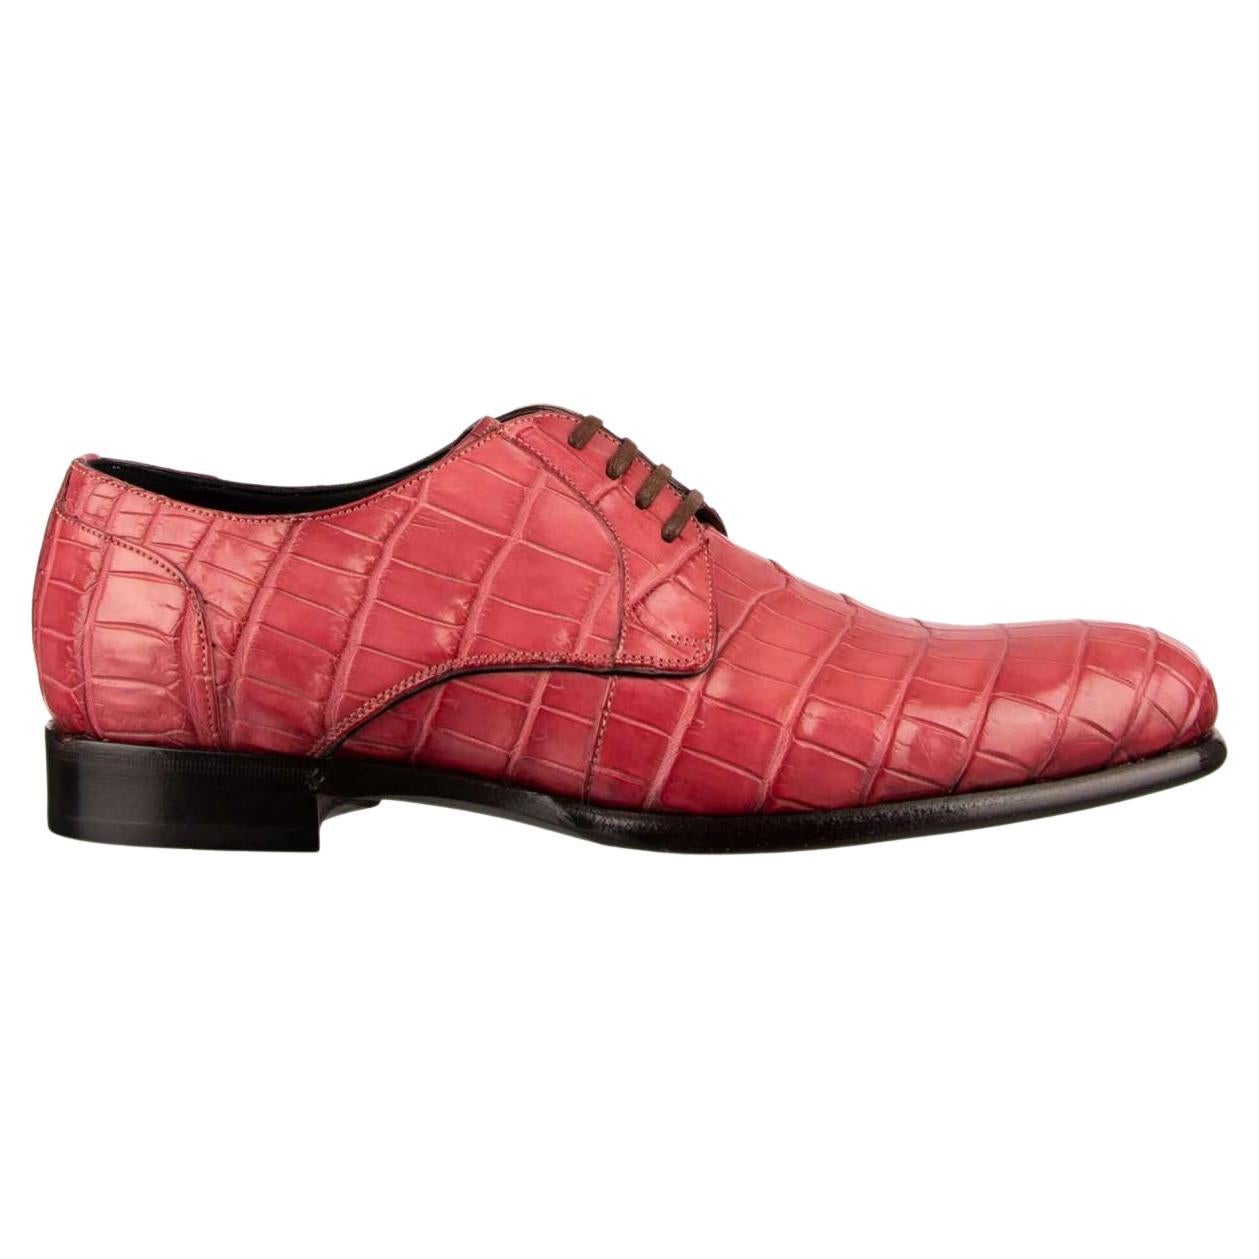 Dolce & Gabbana Crocodile Leather Derby Shoes SIENA Pink EUR 40 For Sale